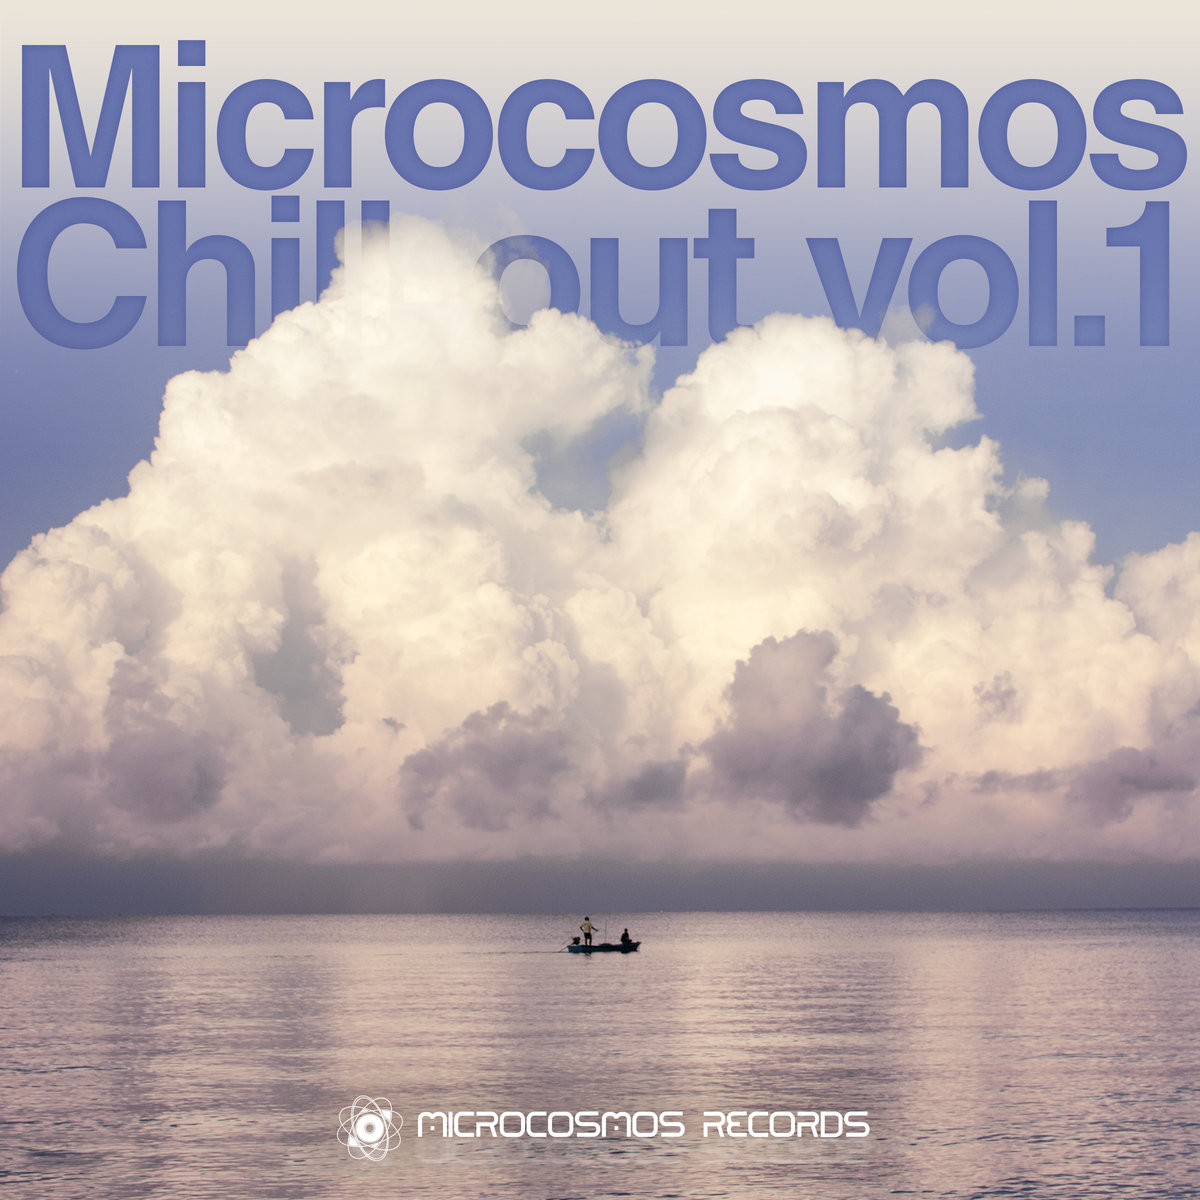 Tarac - Wider Horizons @ 'Various Artists - Microcosmos Chill-out Vol.1' album (ambient, chill-out)